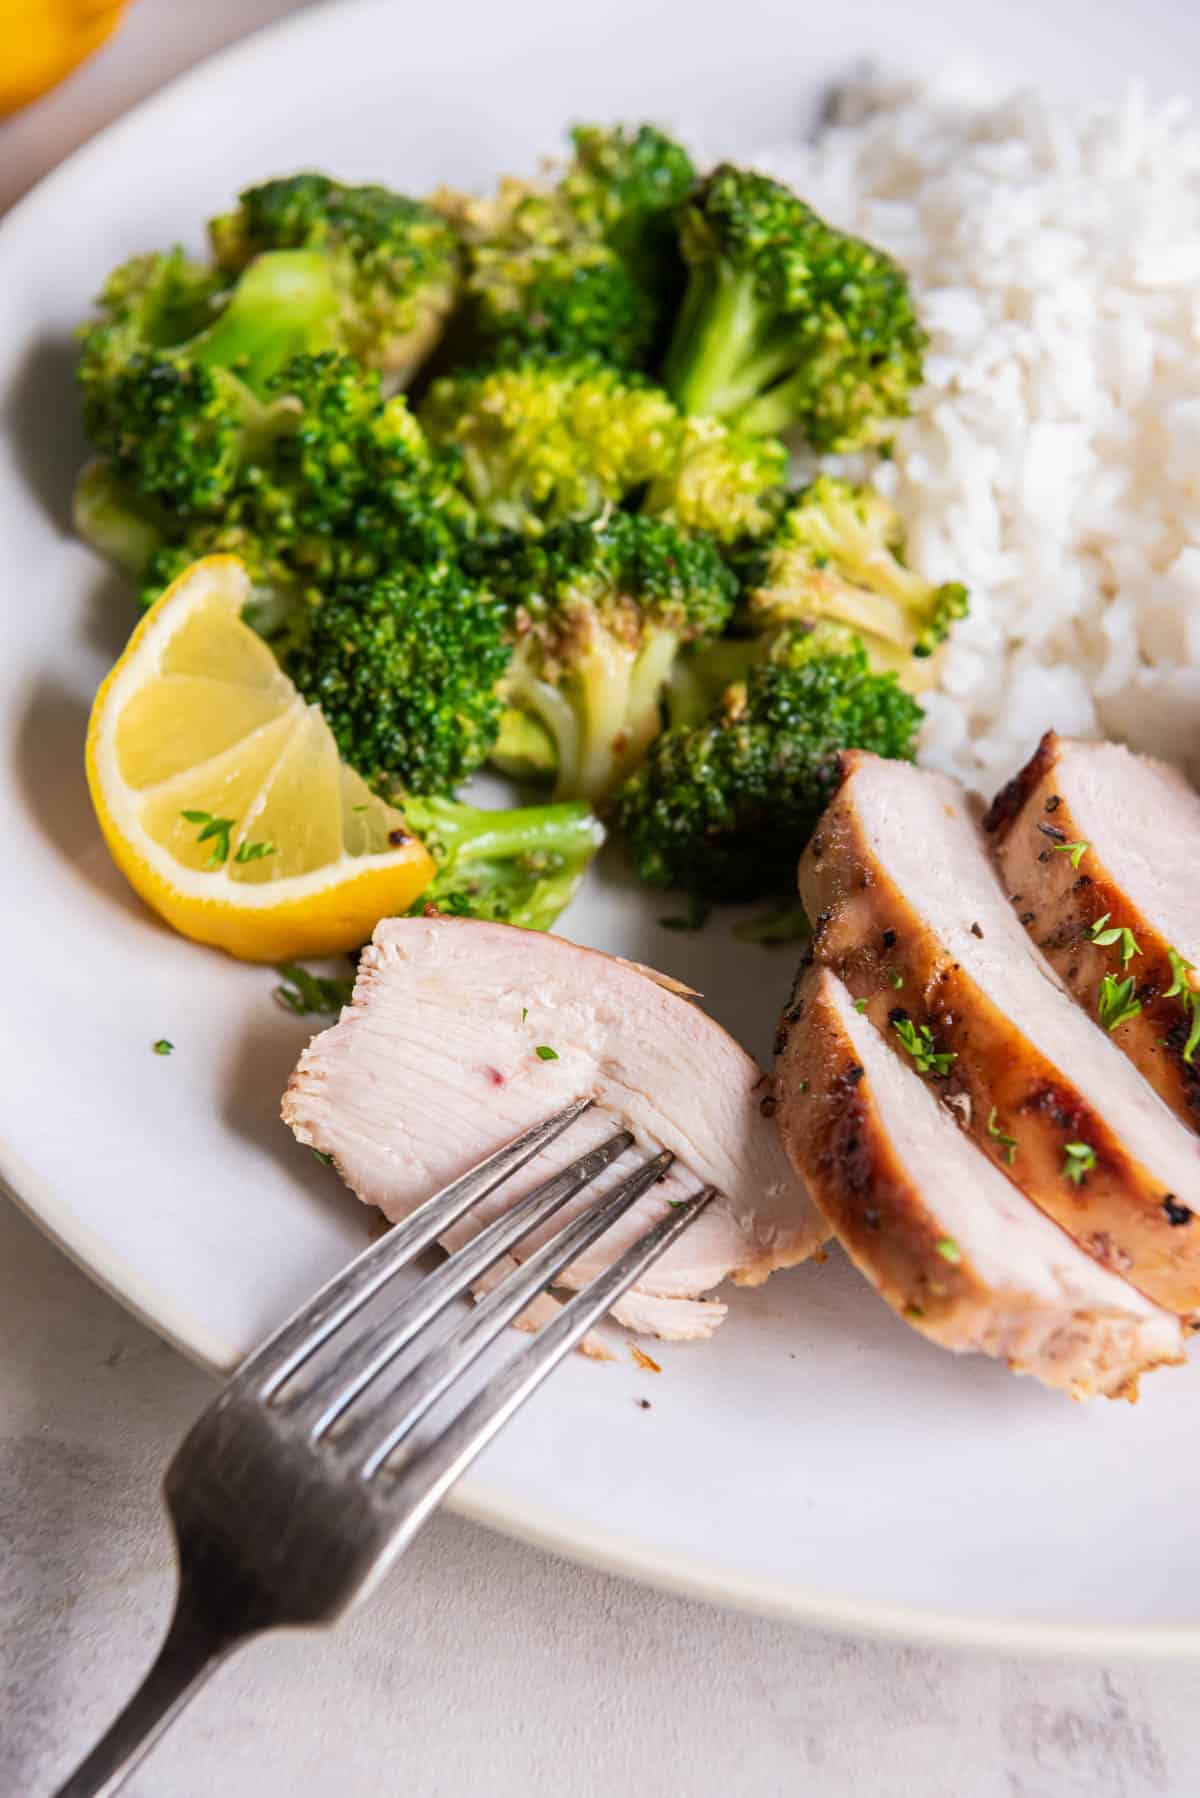 Sliced pieces of grilled lemon pepper chicken on a plate with broccoli.